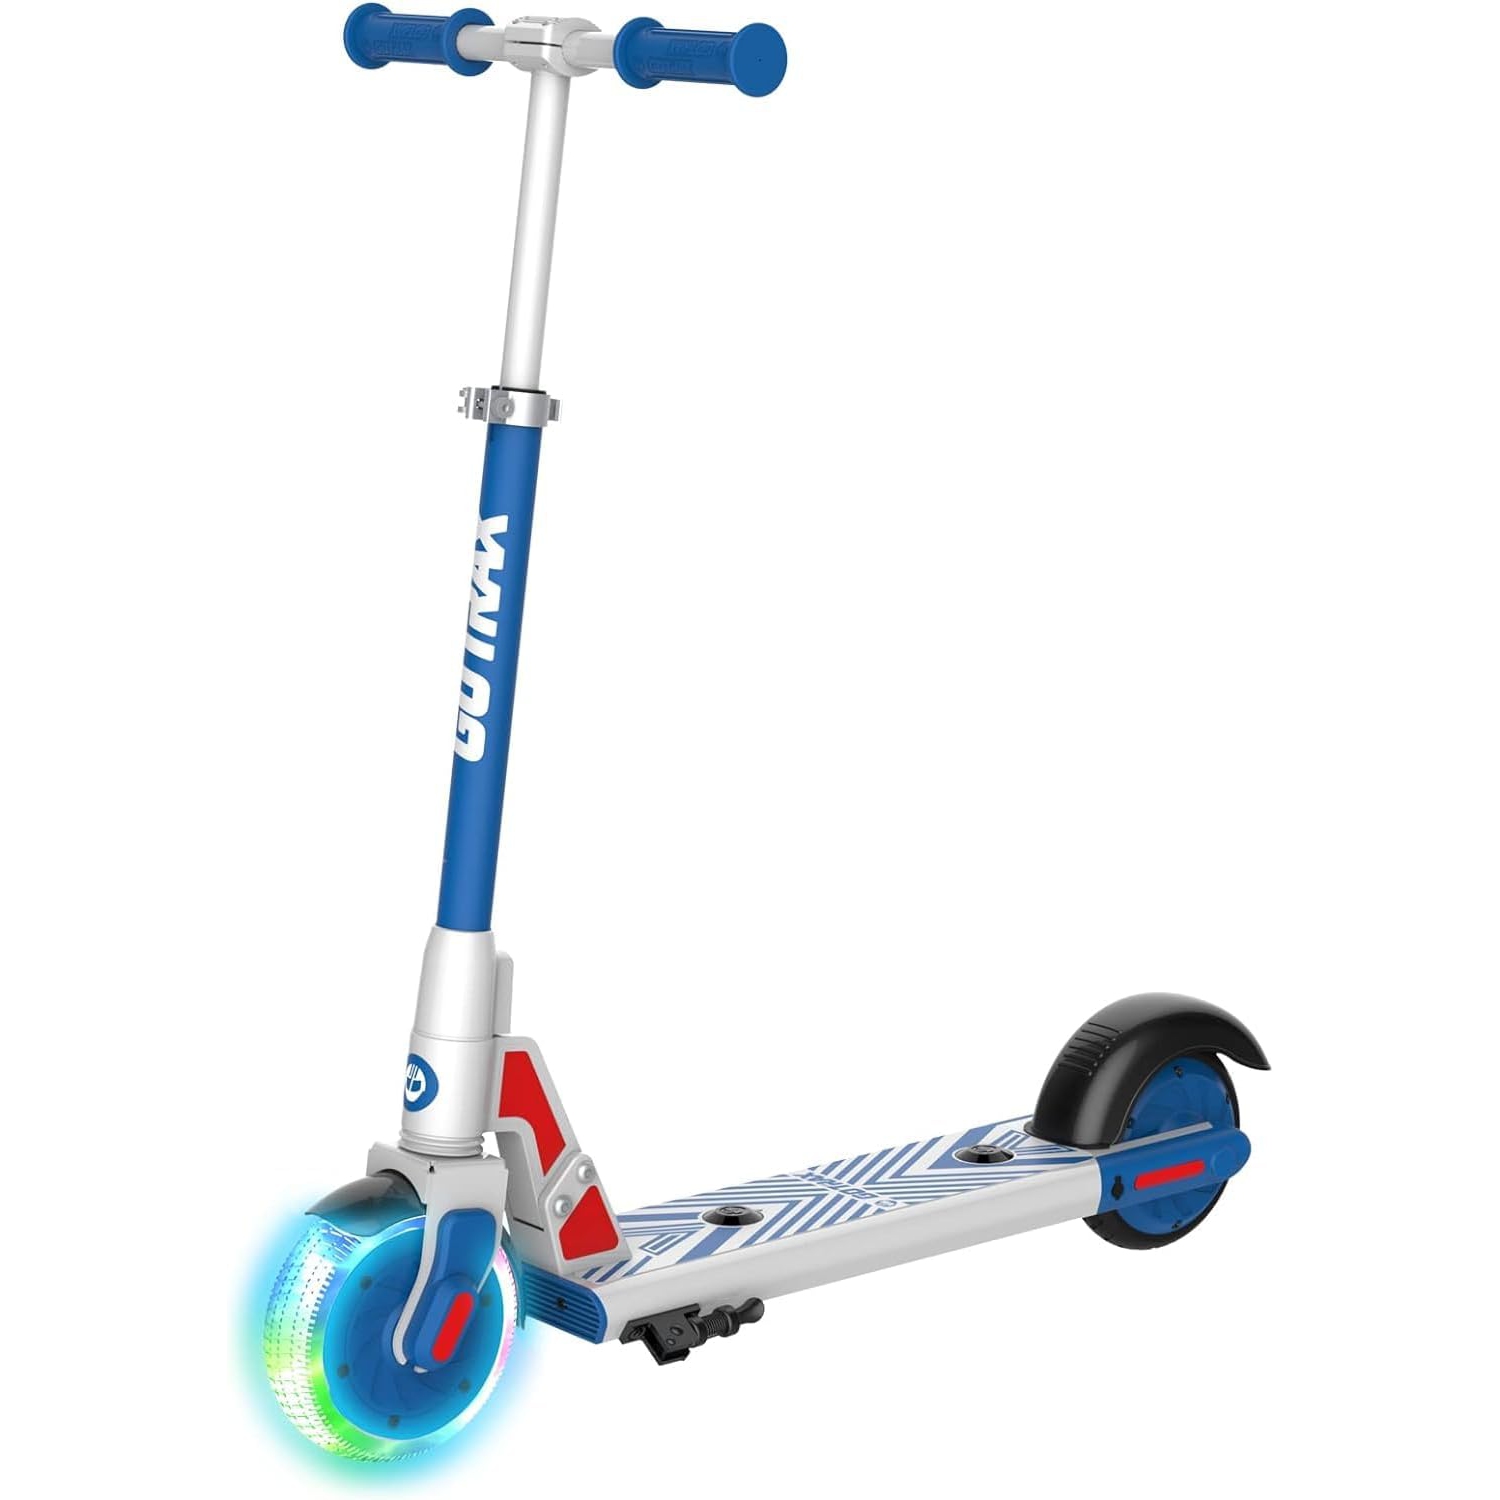 GOTRAX GKS LUMIOS Electric Scooter for Kids 6-12, 150W Motor and 25.2V 2.6Ah Lithium Battery, 6" LED Luminous Front Wheel and 3 Adjustable Heights, Safety UL2272 Certified(Blue)